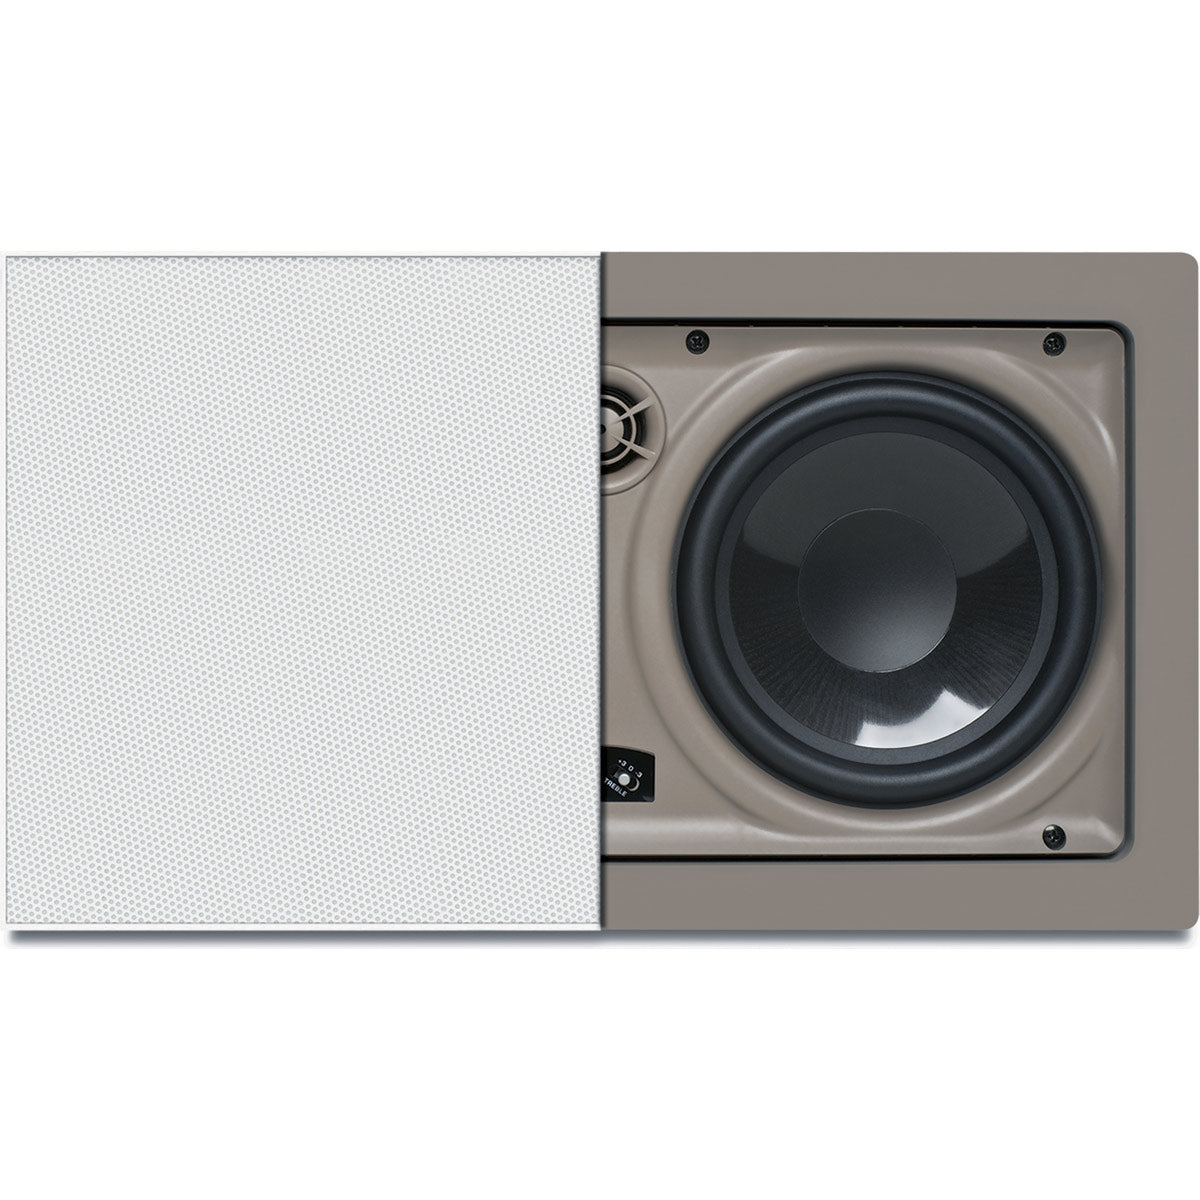 Proficient Audio Protege IW630 In-Wall LCR Speaker